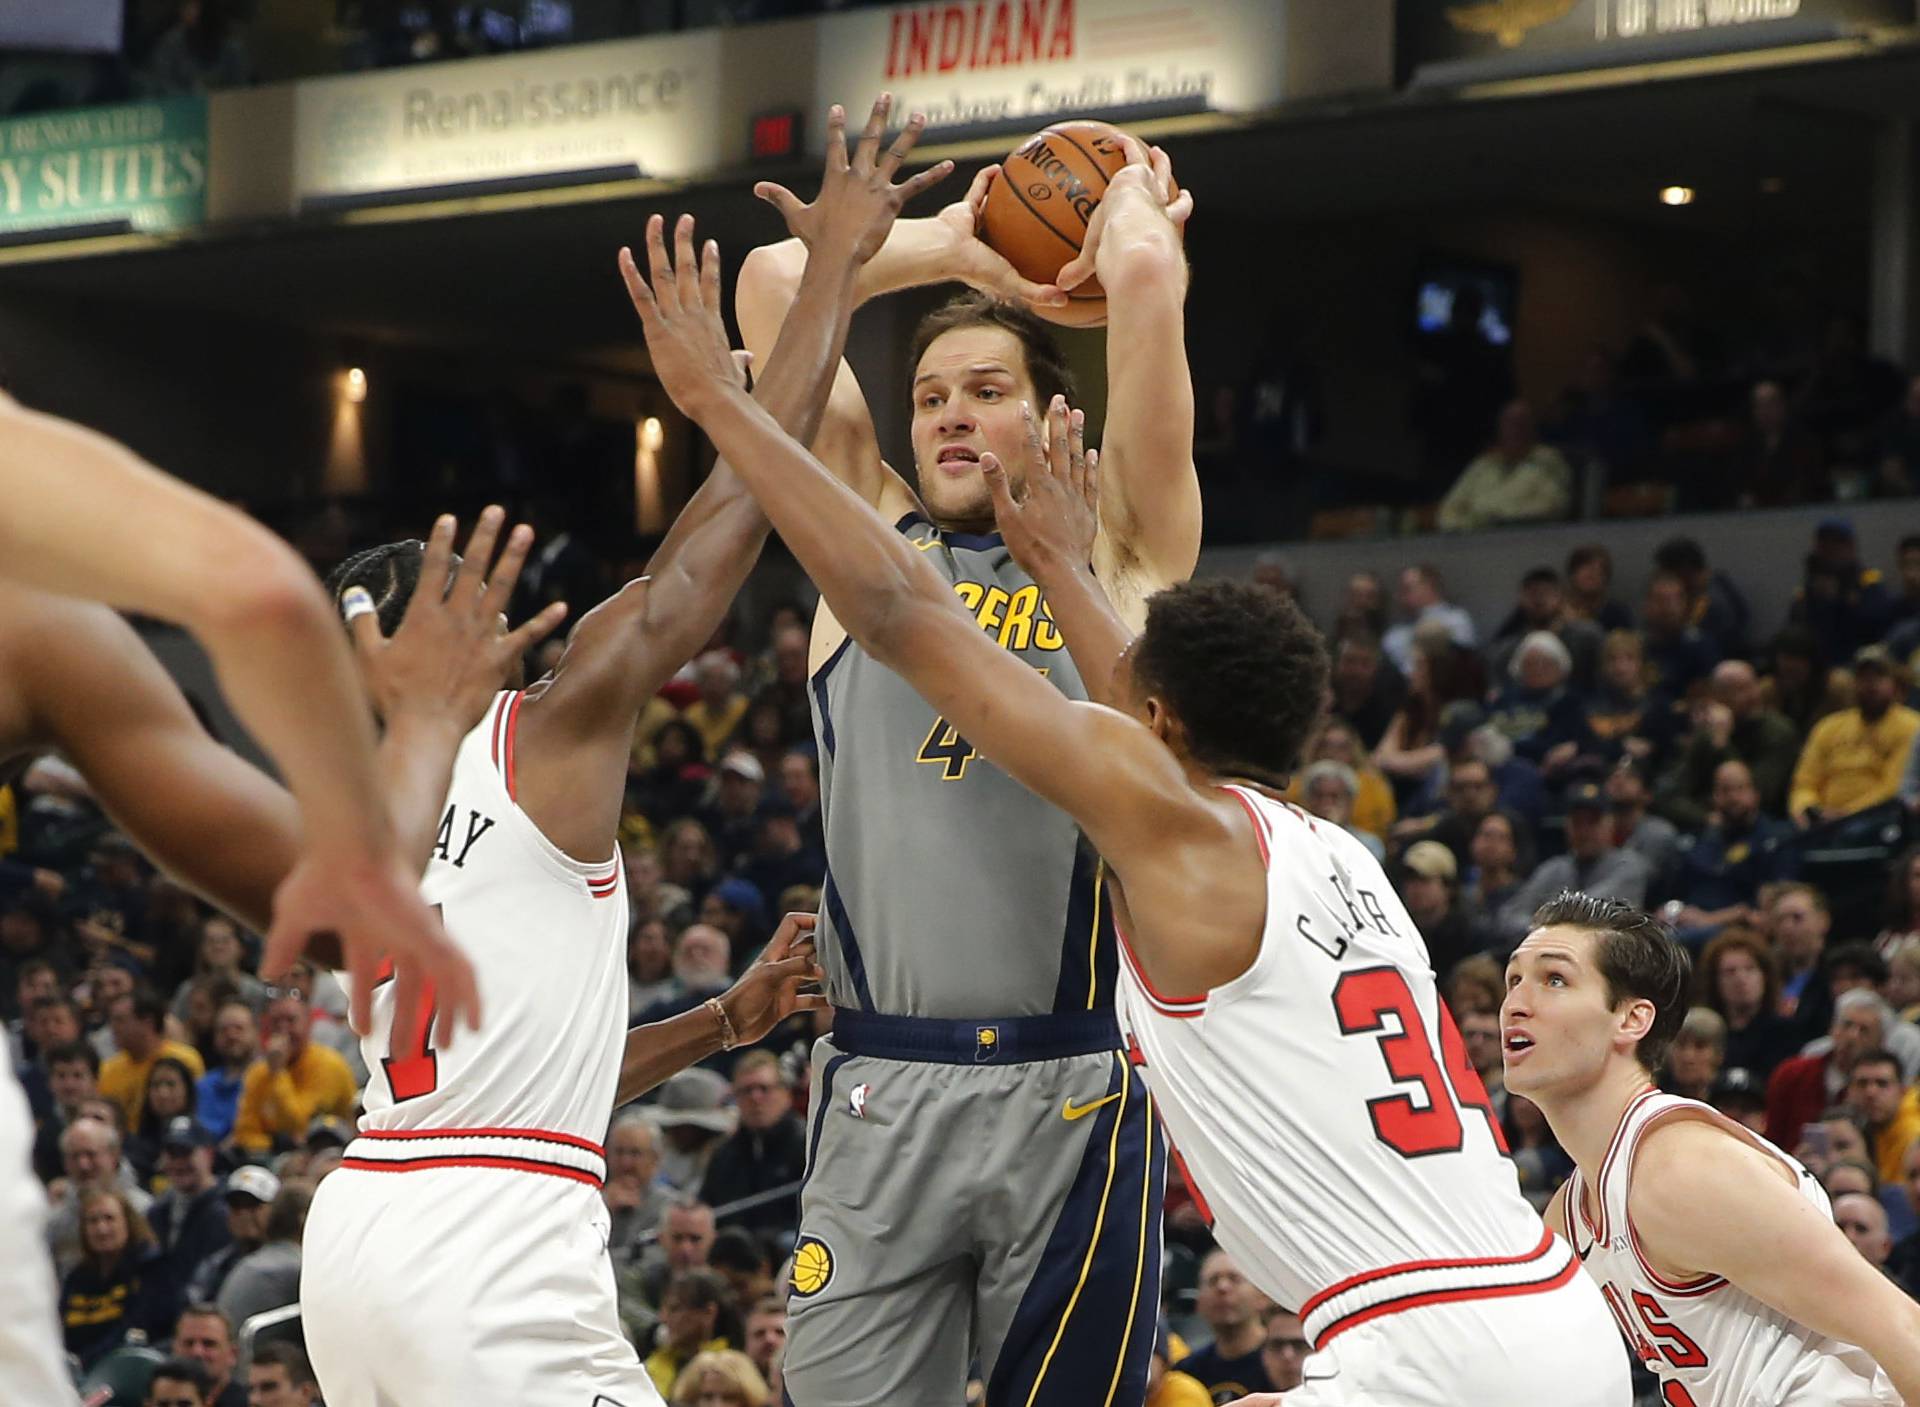 NBA: Chicago Bulls at Indiana Pacers